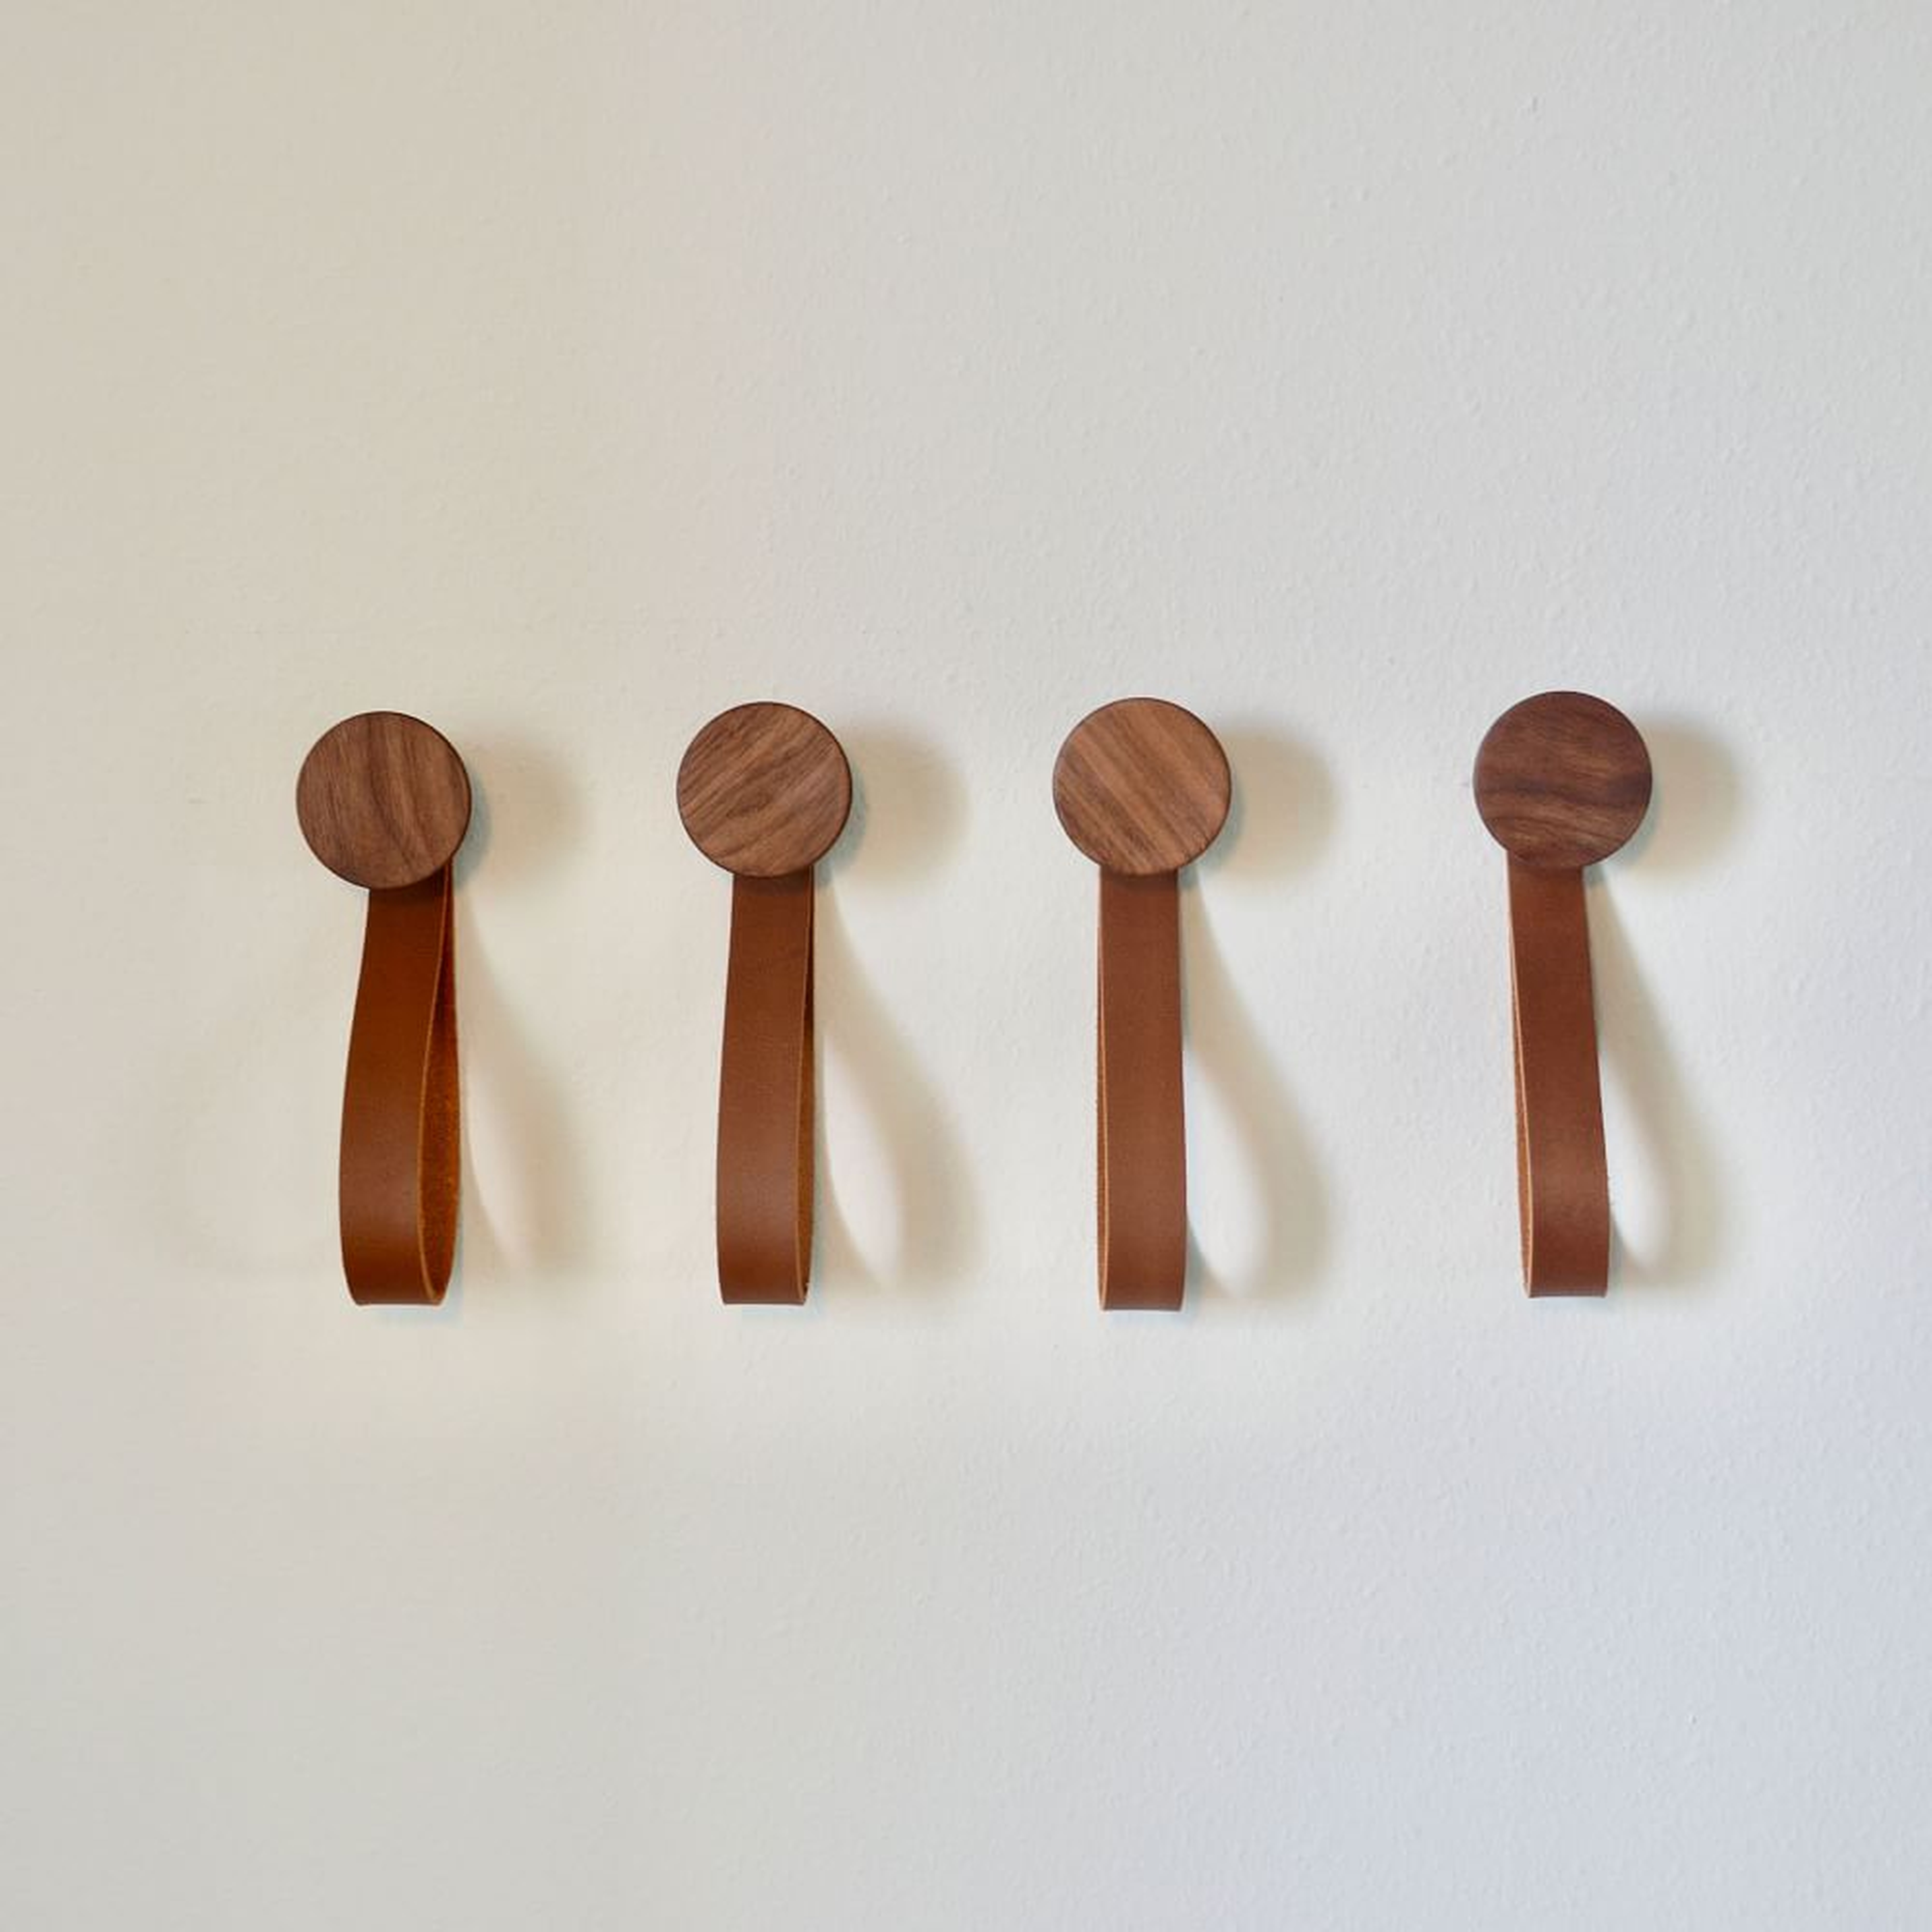 Modern Home Cone Wood Wall Hook with Leather Strap, Walnut, Set Of 4 - West Elm